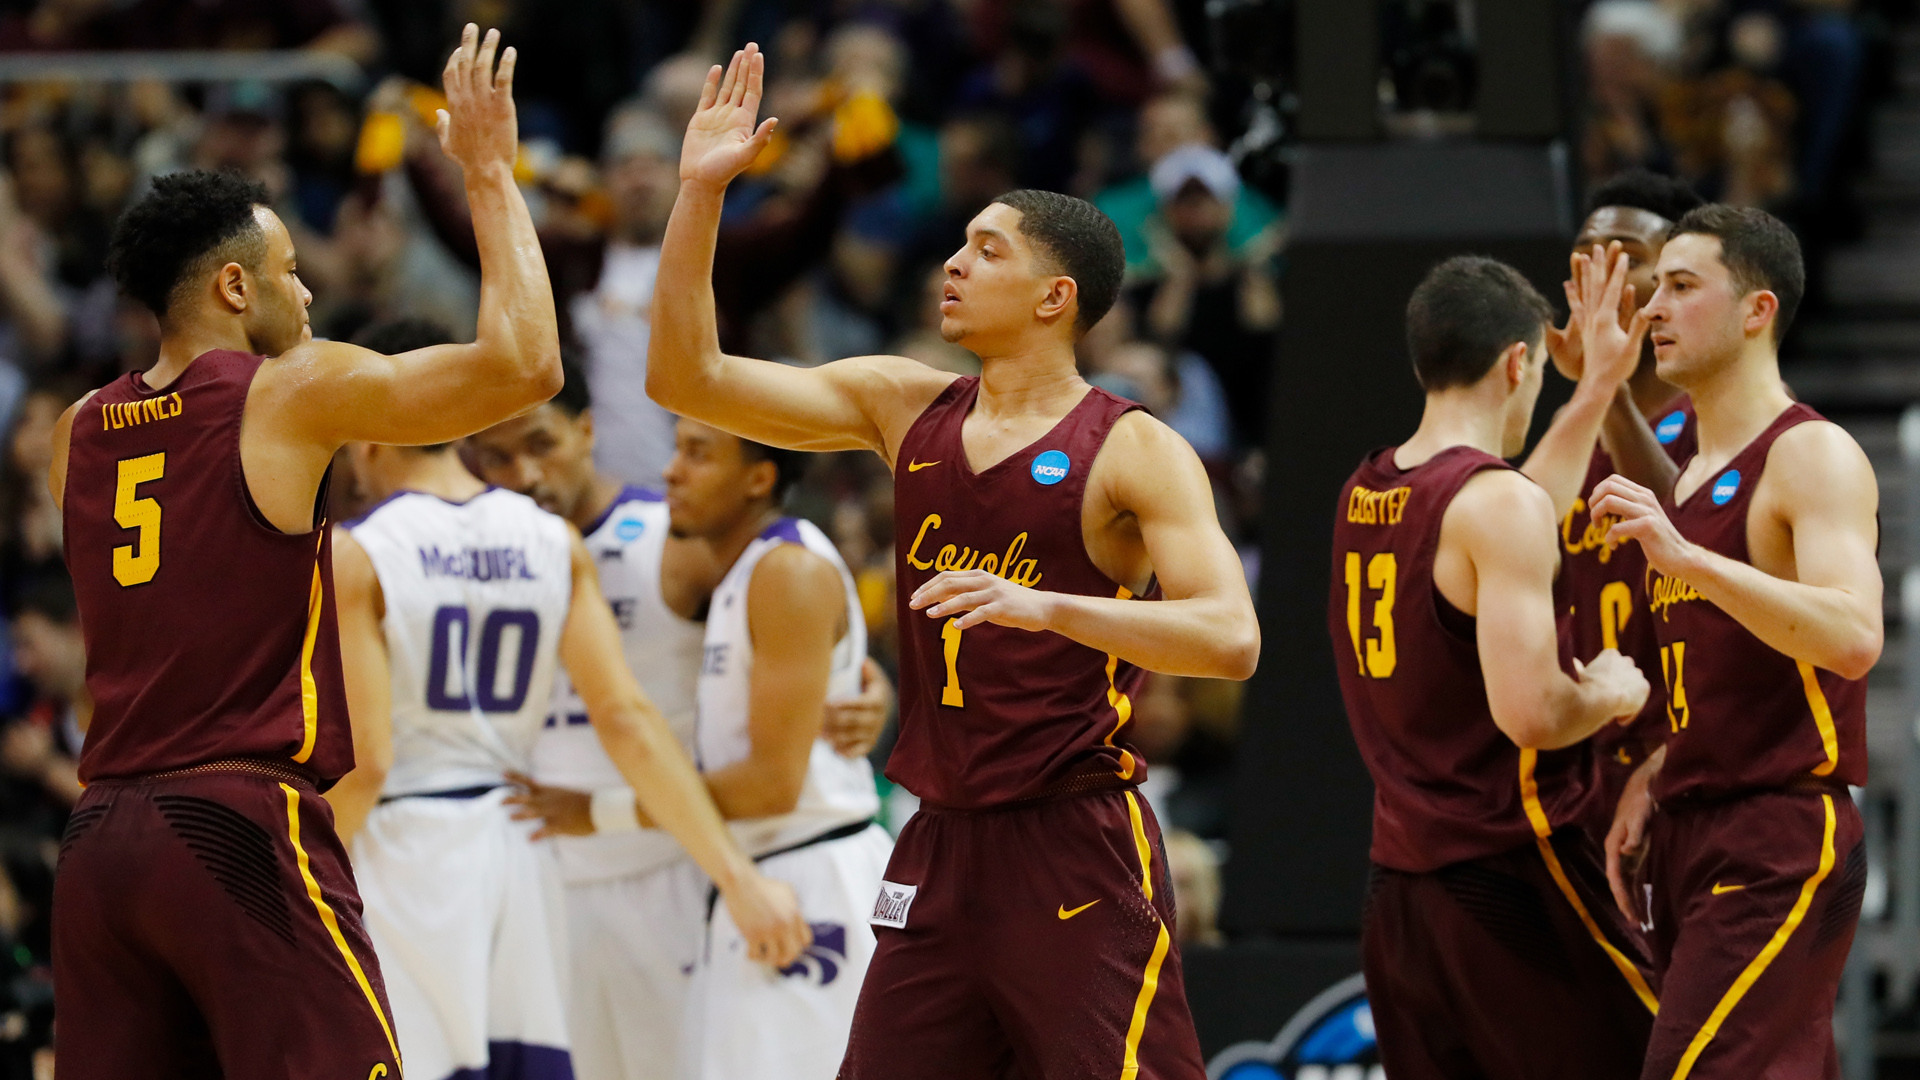 March Madness 2018: Three takeaways from Loyola Chicago #39 s Elite 8 win